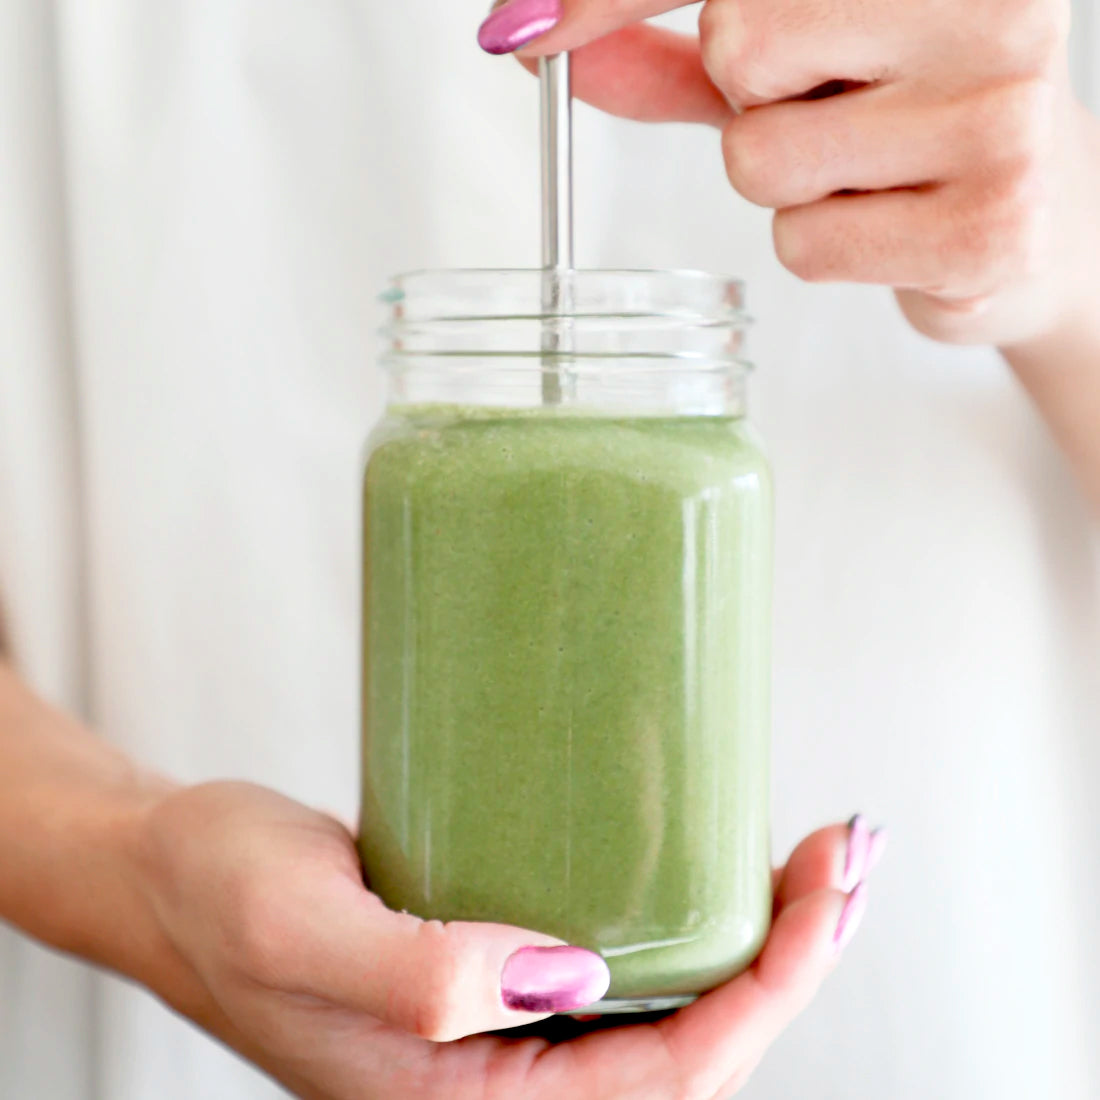 KIANO's Detox Greens Meal Shake: A Healthy Green Twist to Your Morning Smoothie